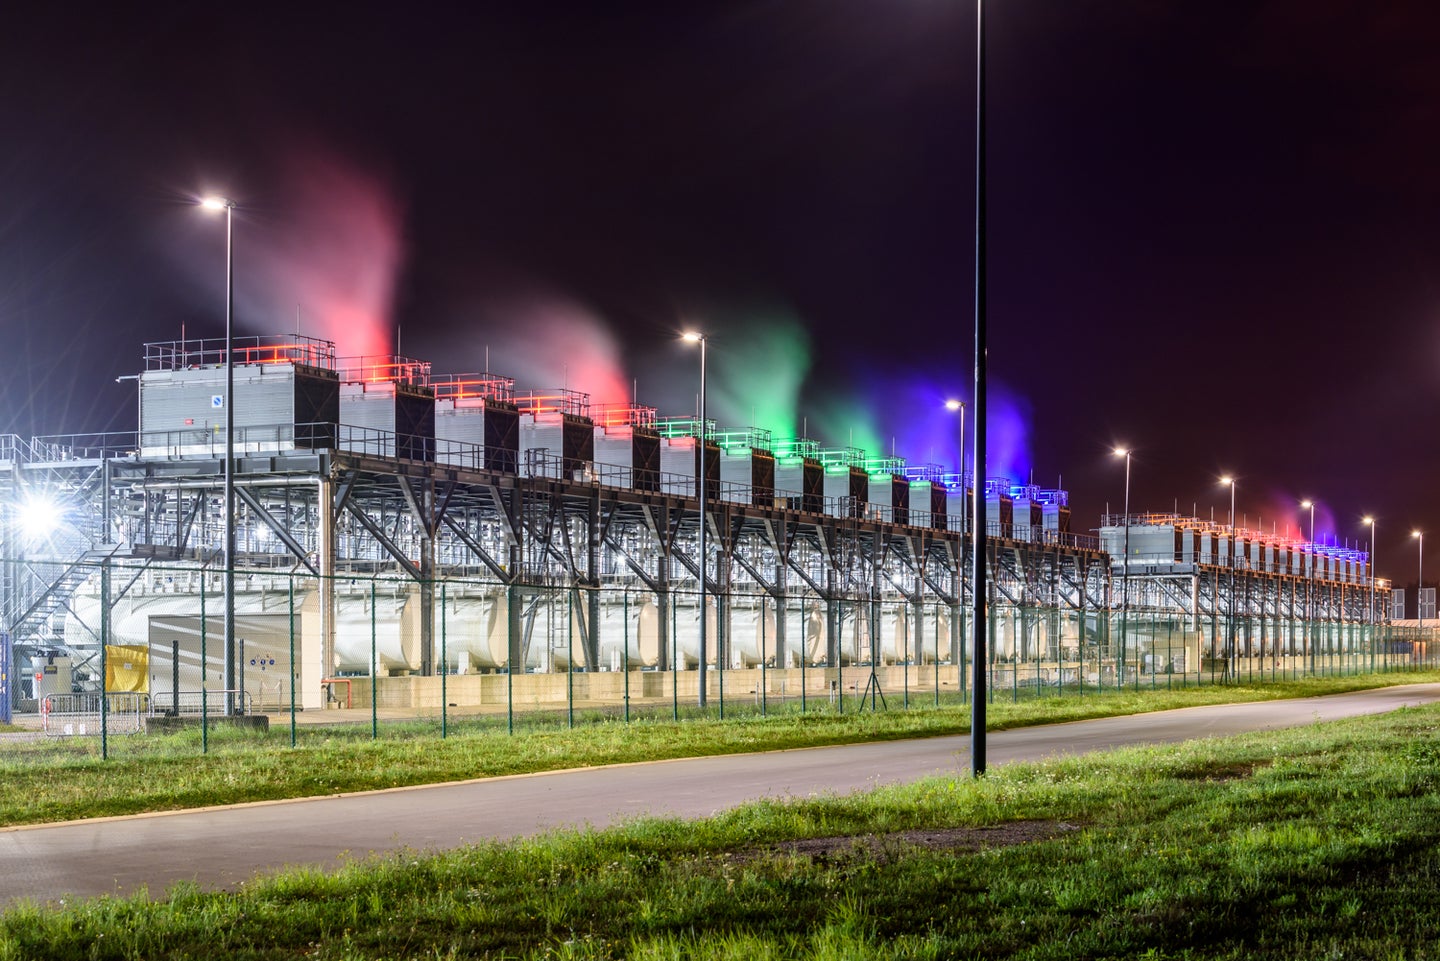 Google data center and server farm in St. Ghislain, Belgium, with cooling towers lit up at night